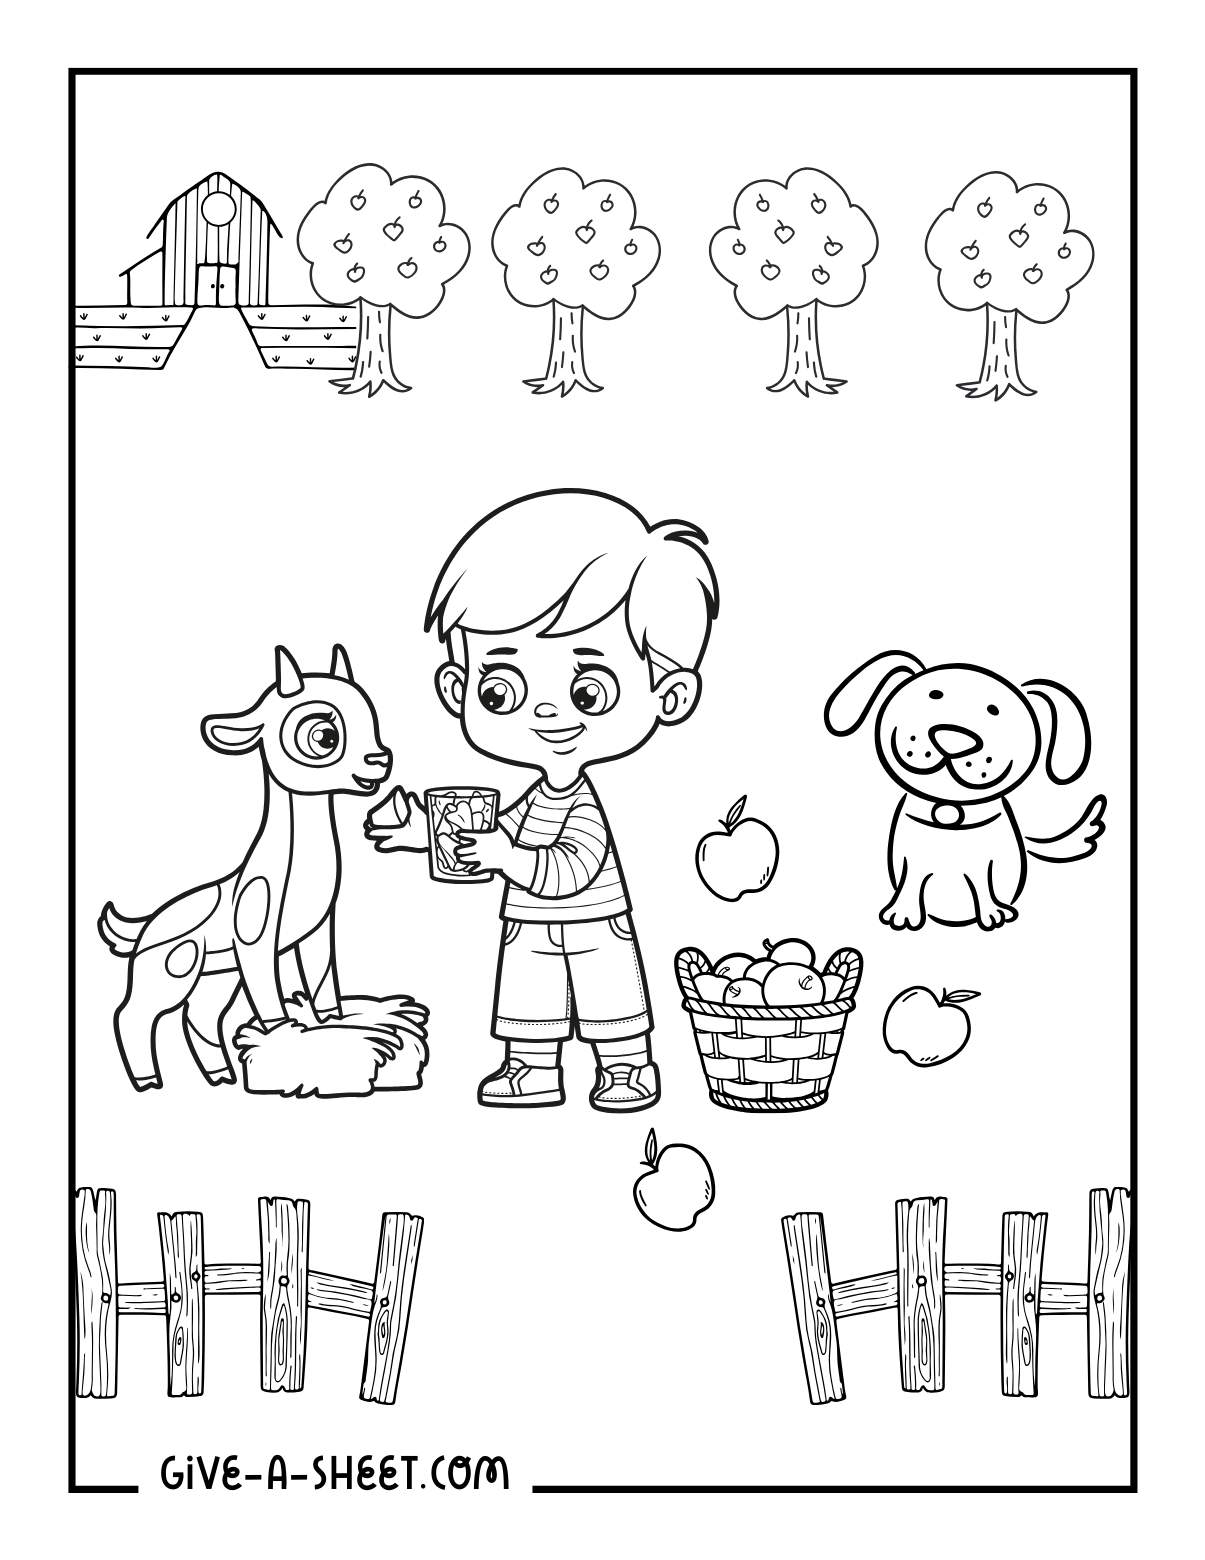 Apple tree farm coloring page for kids.